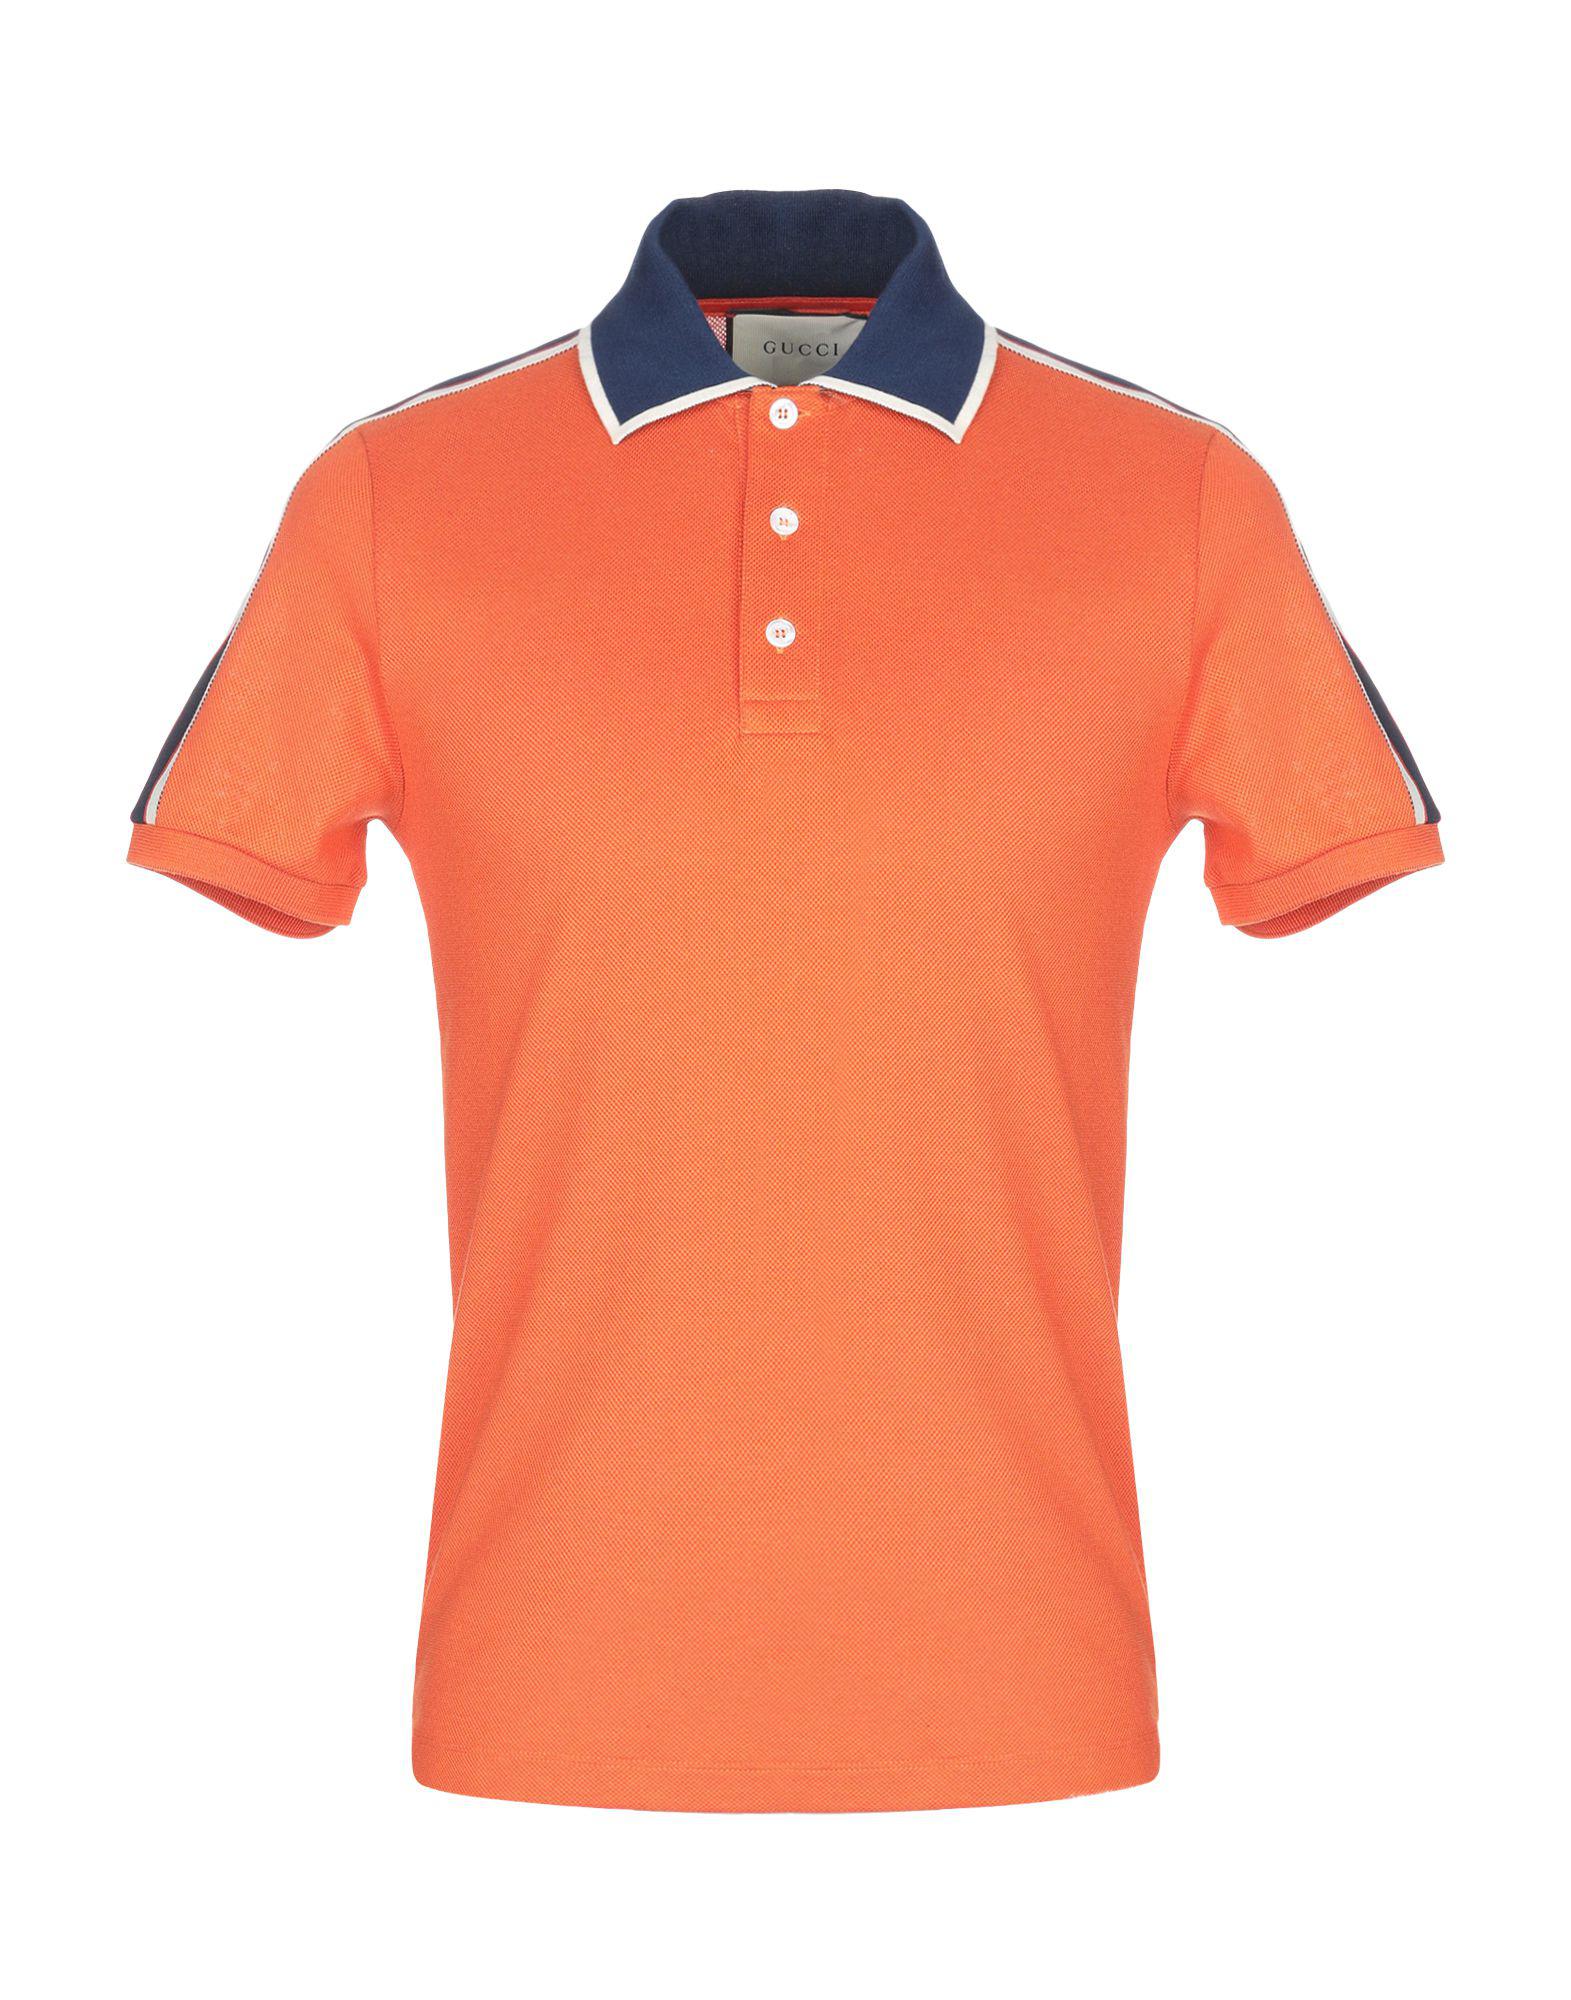 Gucci Cotton Polo Shirt in Orange for Men - Lyst